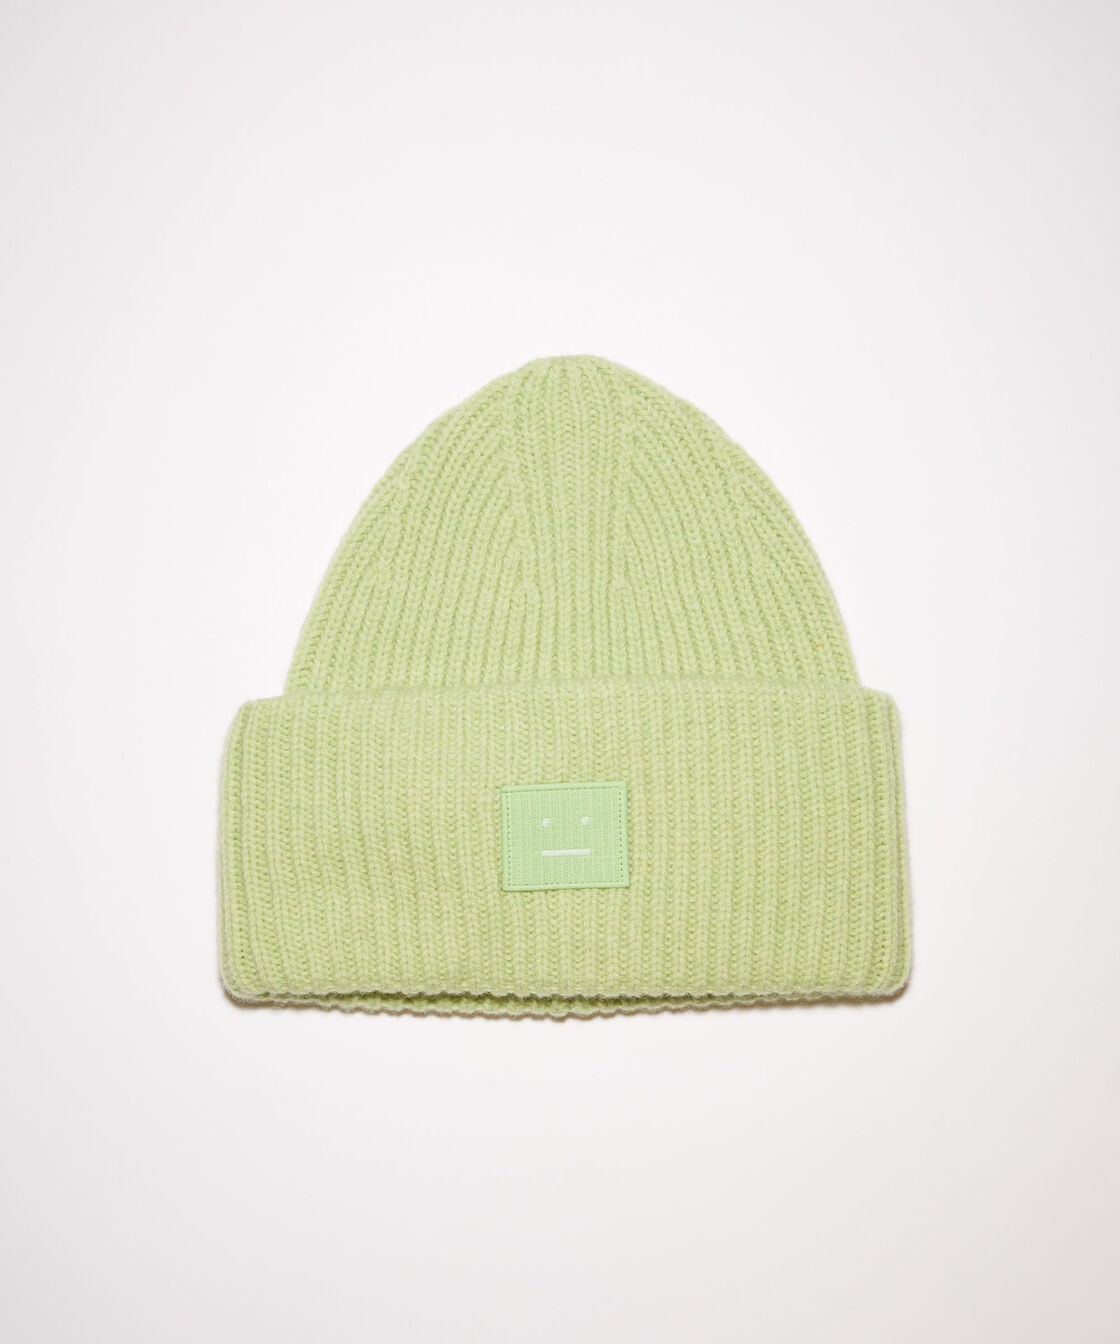 Acne Studios pale green melange knit beanie featuring a large embroidered face logo pitch and ribbed detailing, crafted from chunky wool.